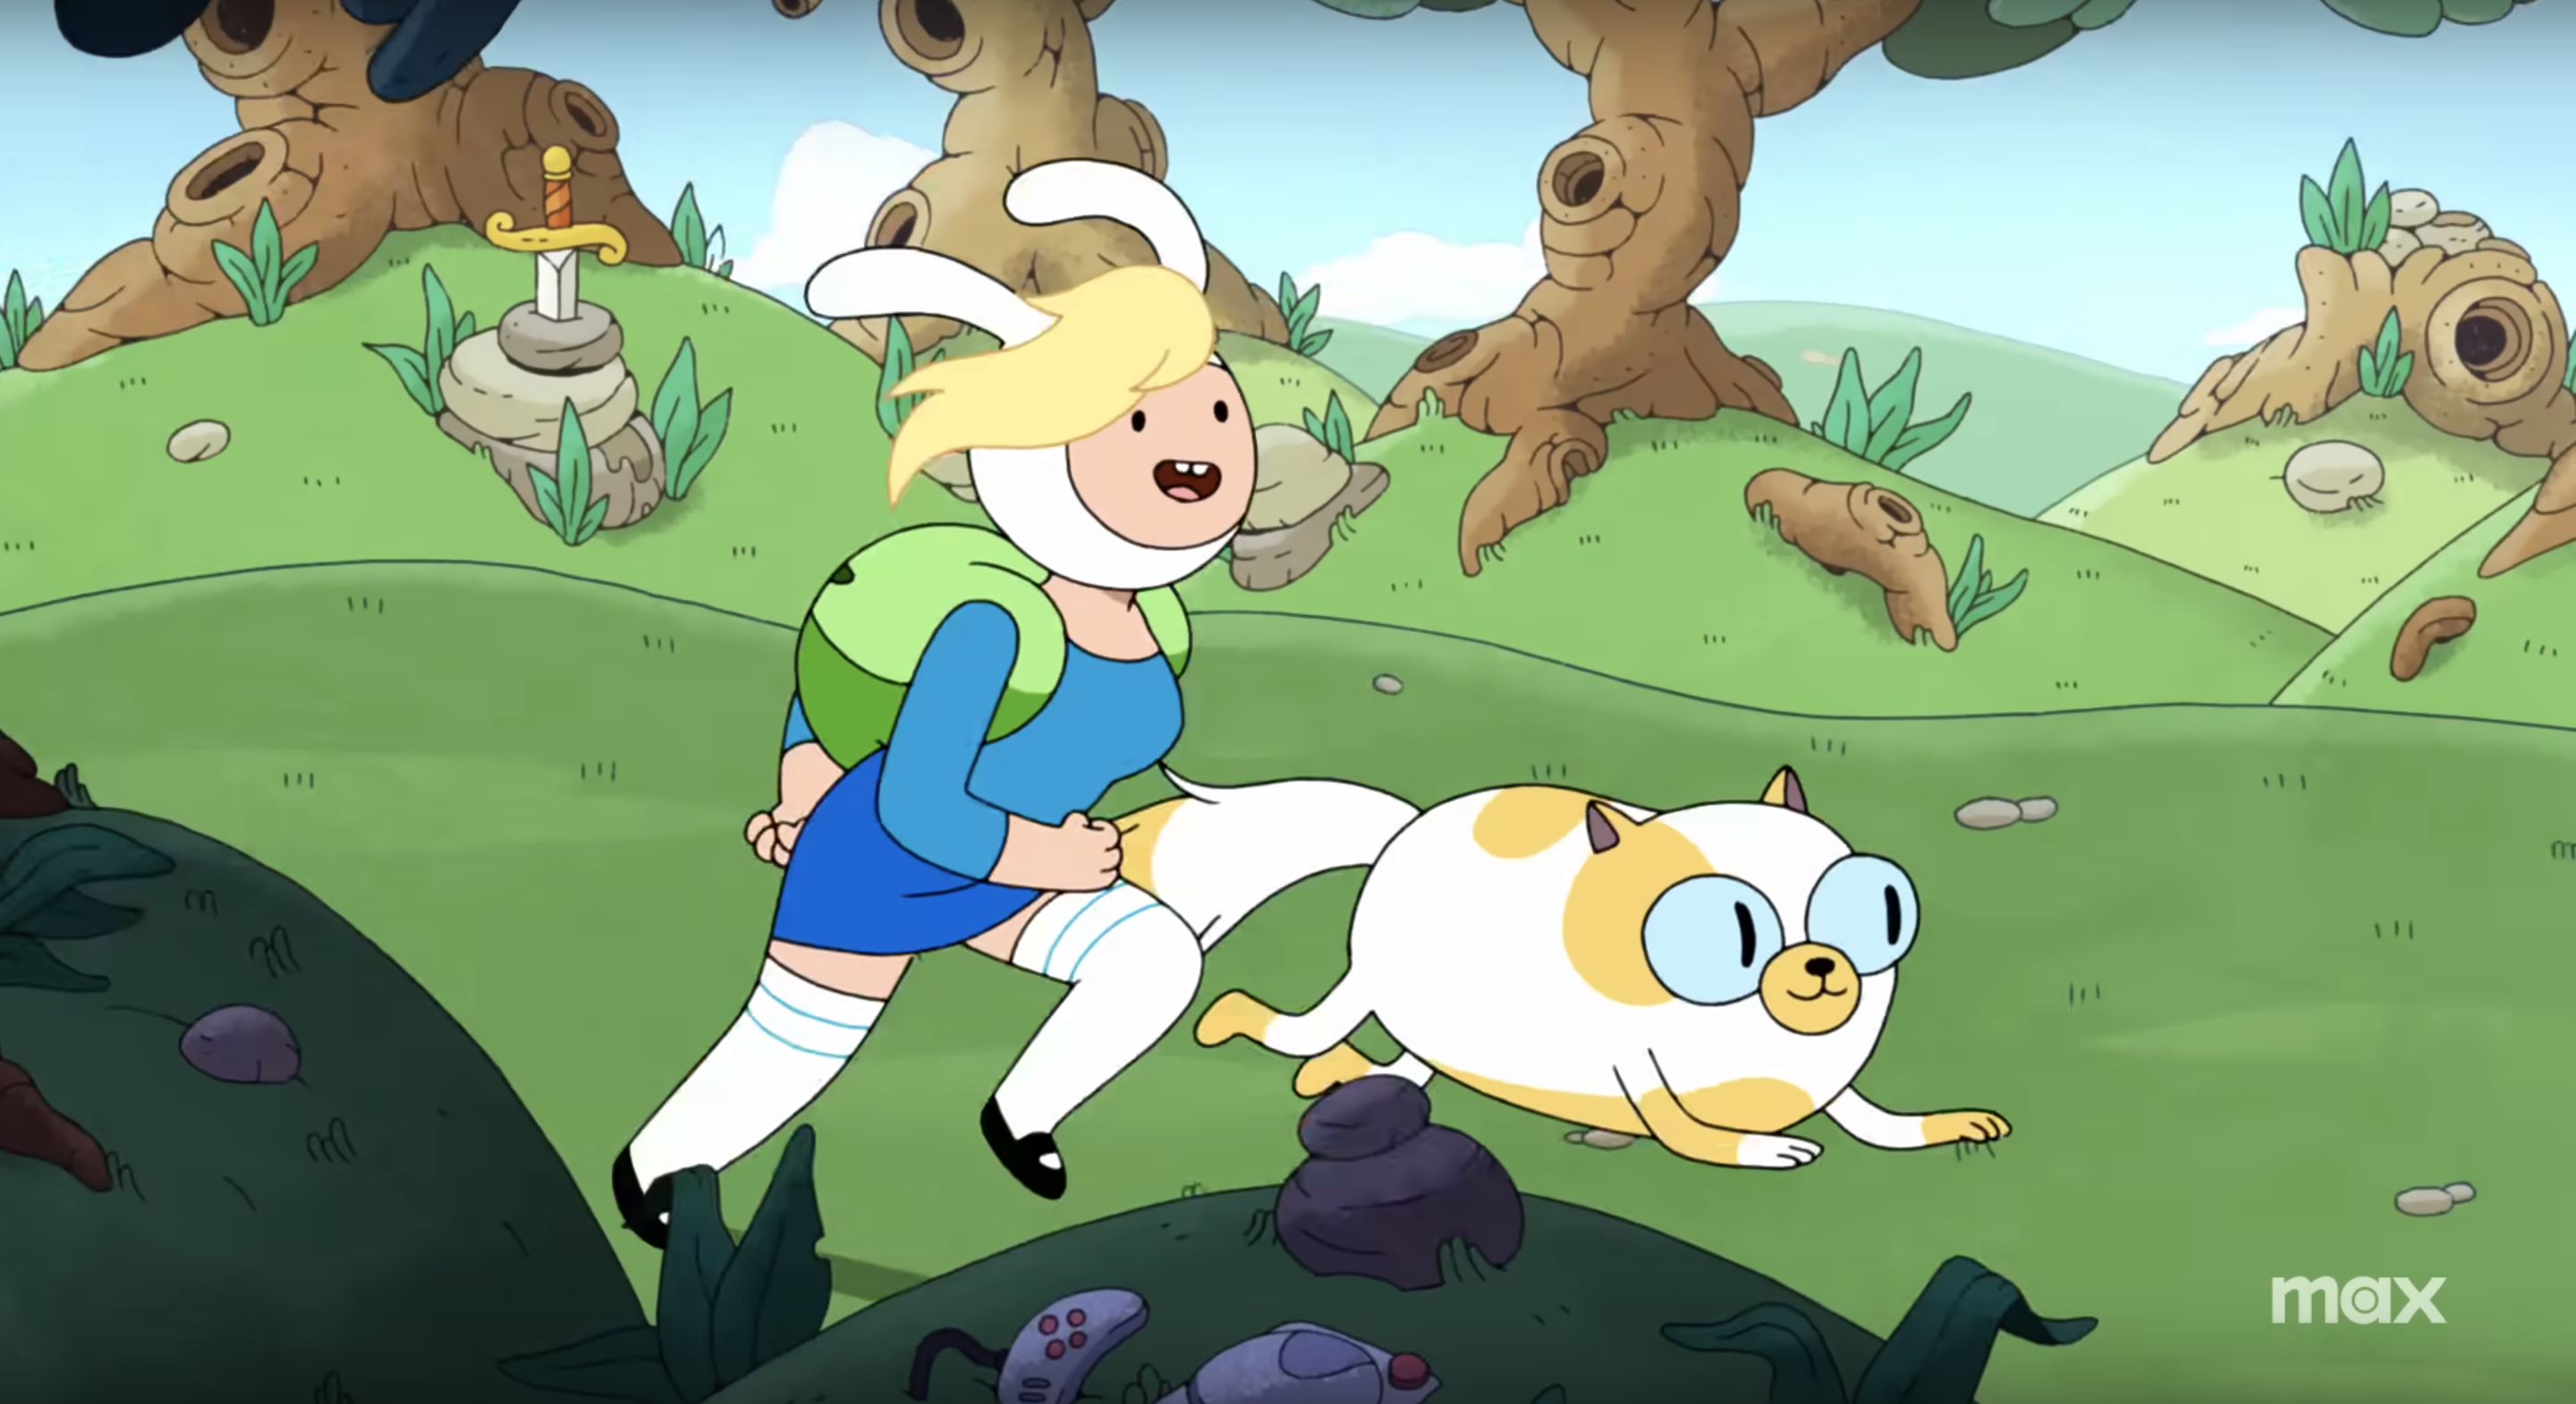 Fionna and Cake running across the Land of Ooo in 